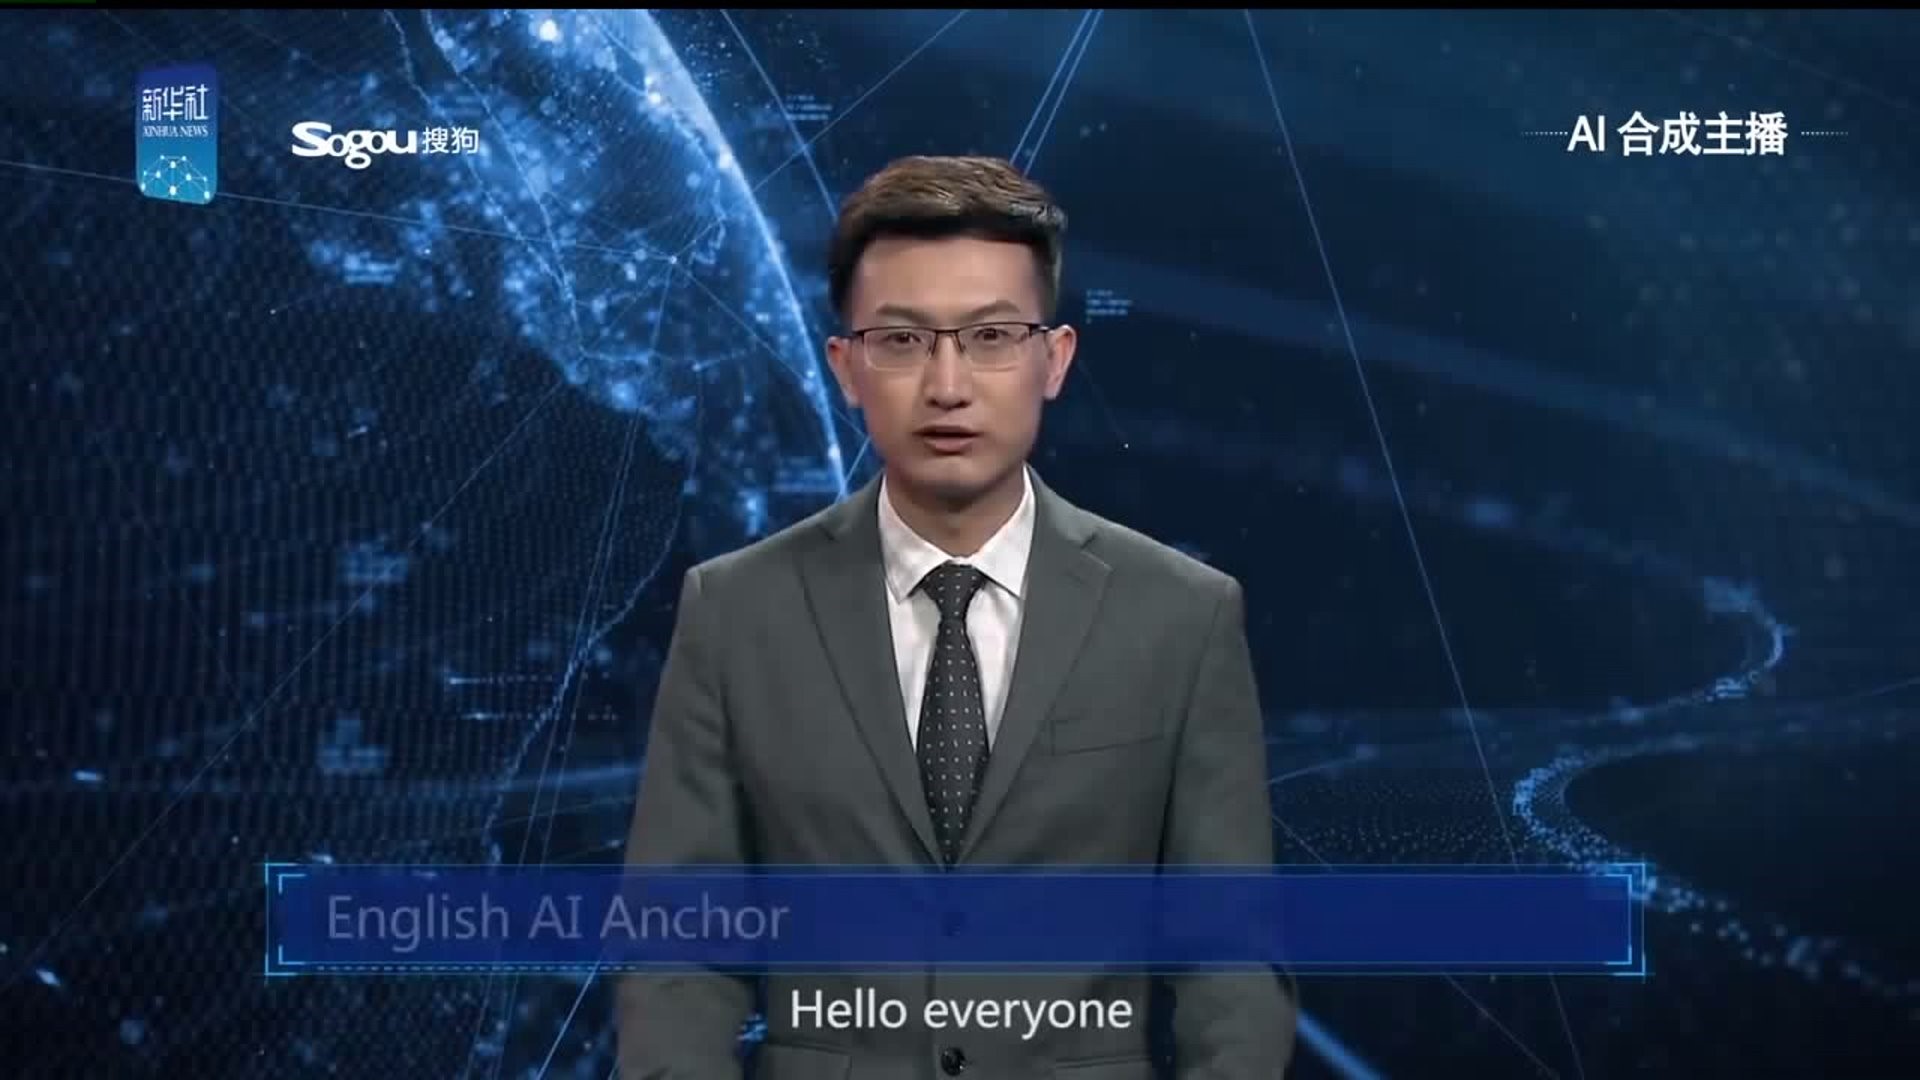 Virtual anchors are now reporting China`s news